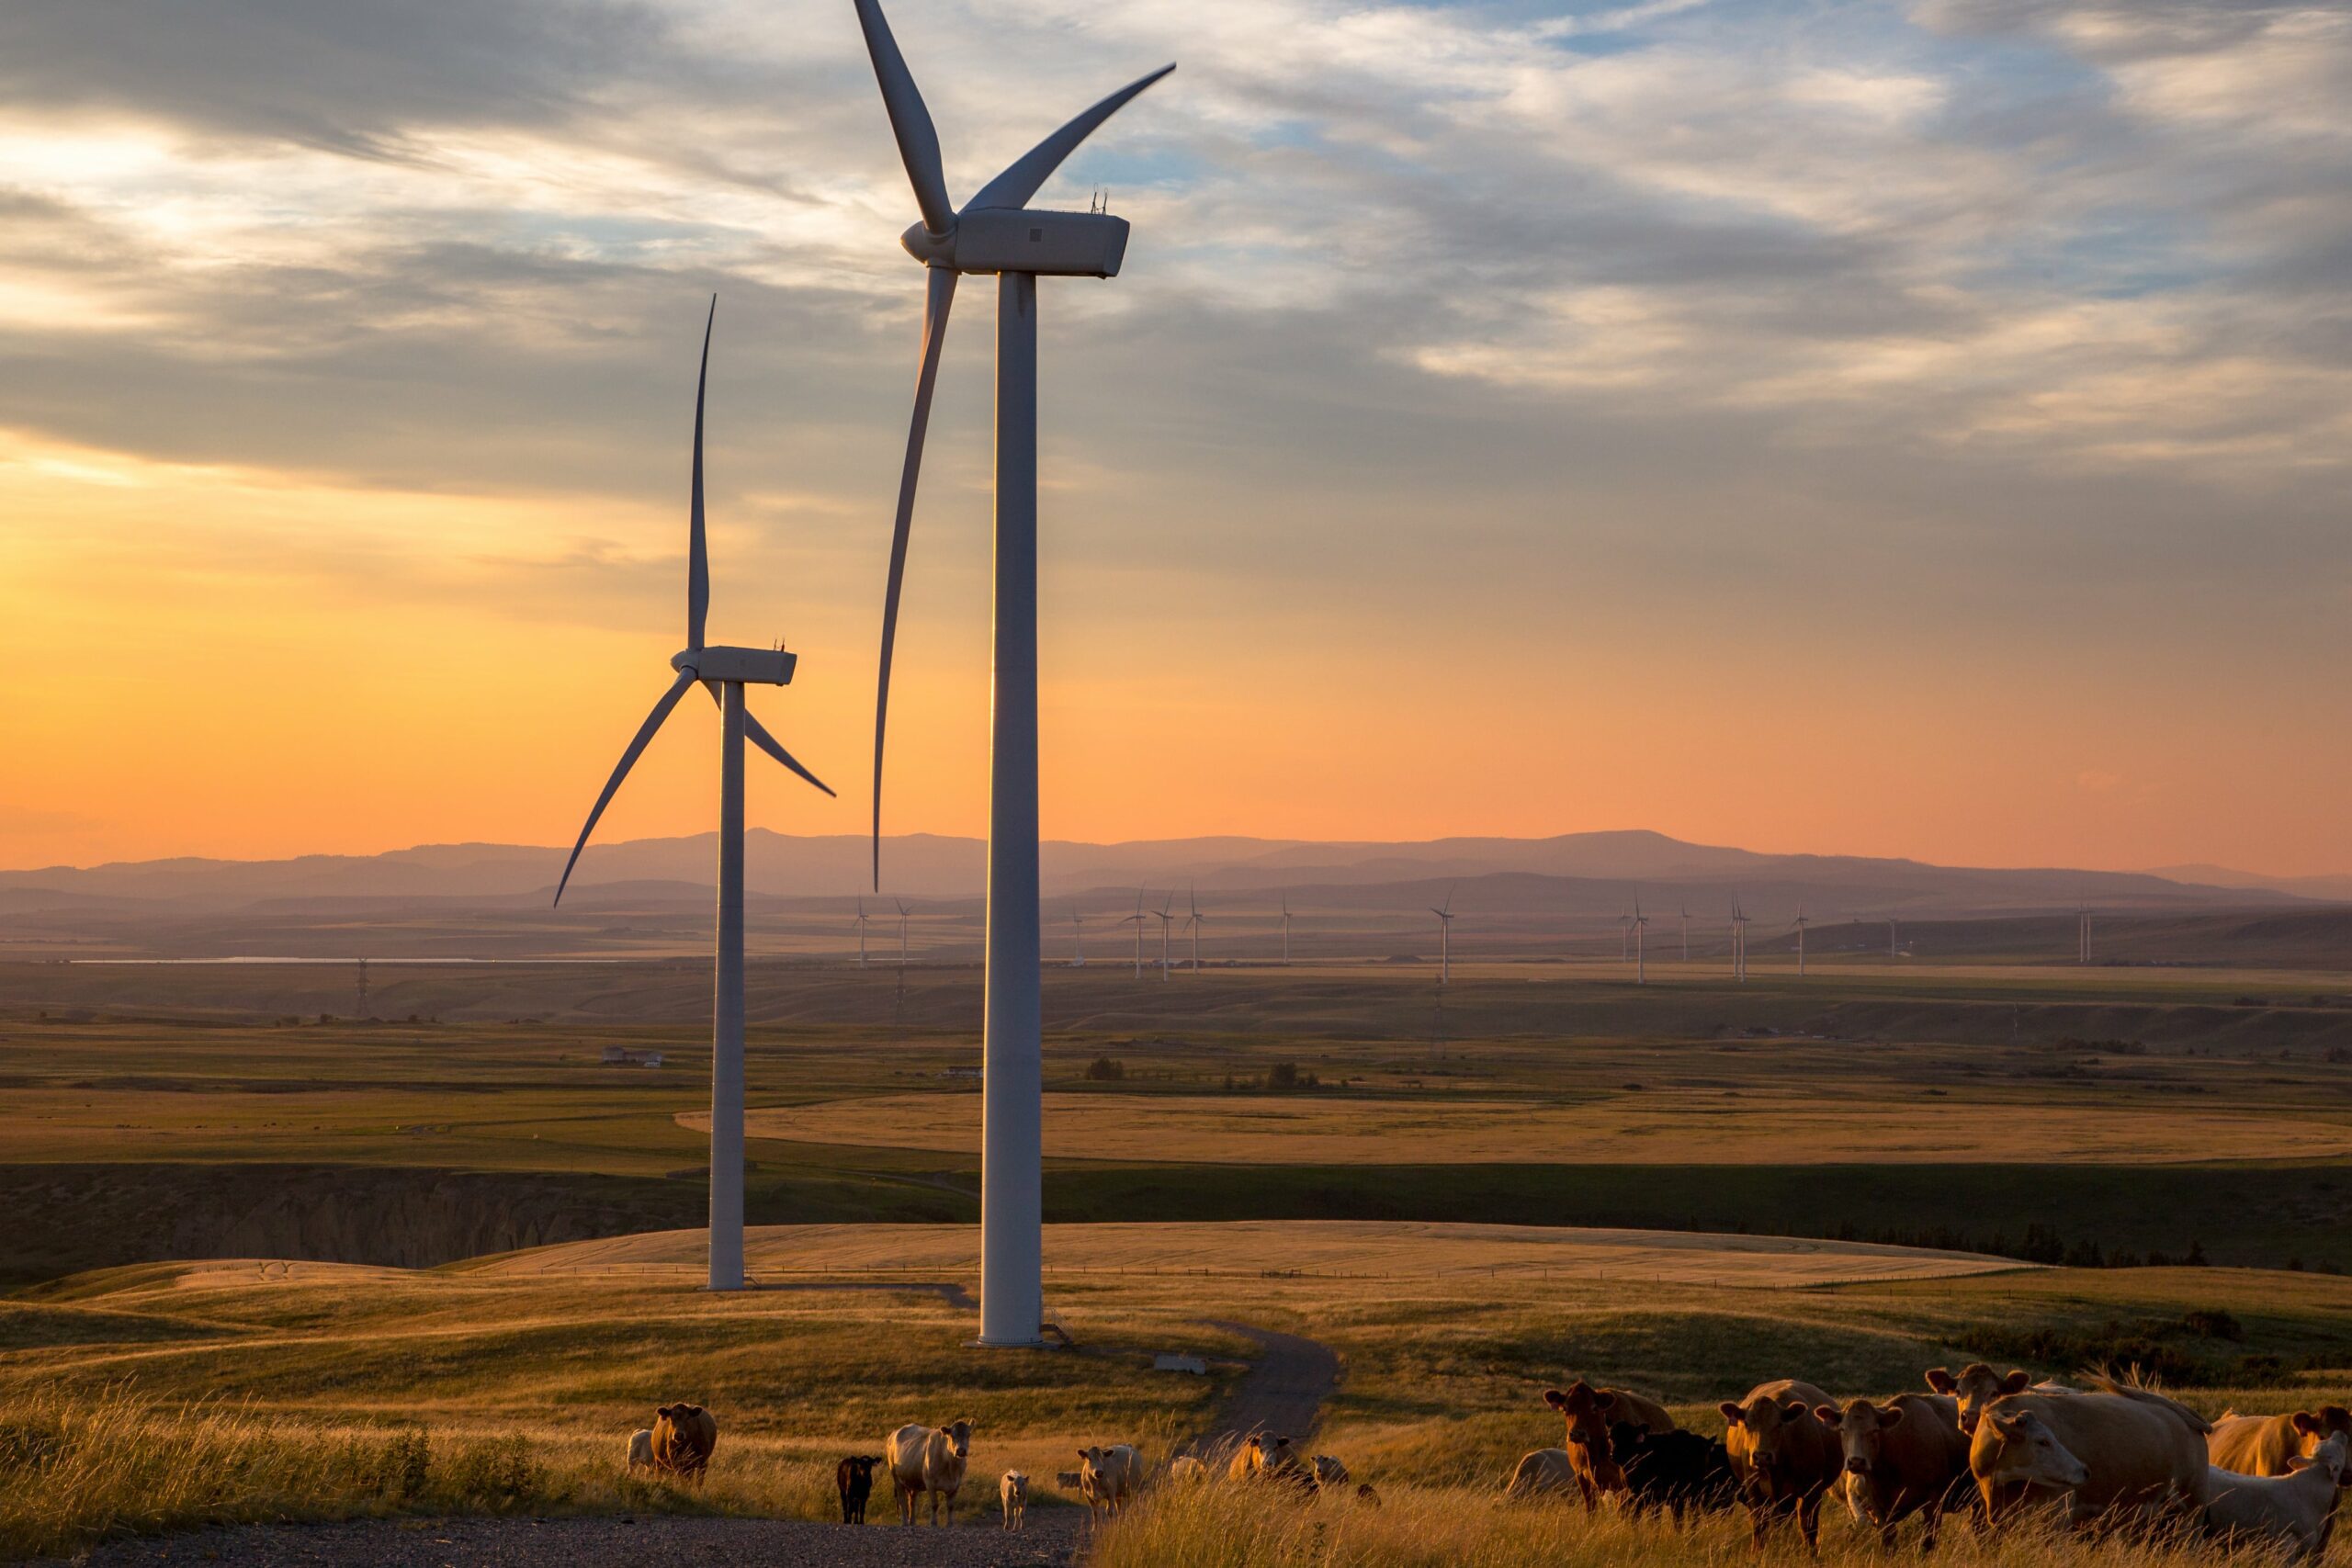 Alberta provides some of the lowest cost renewable power in North America